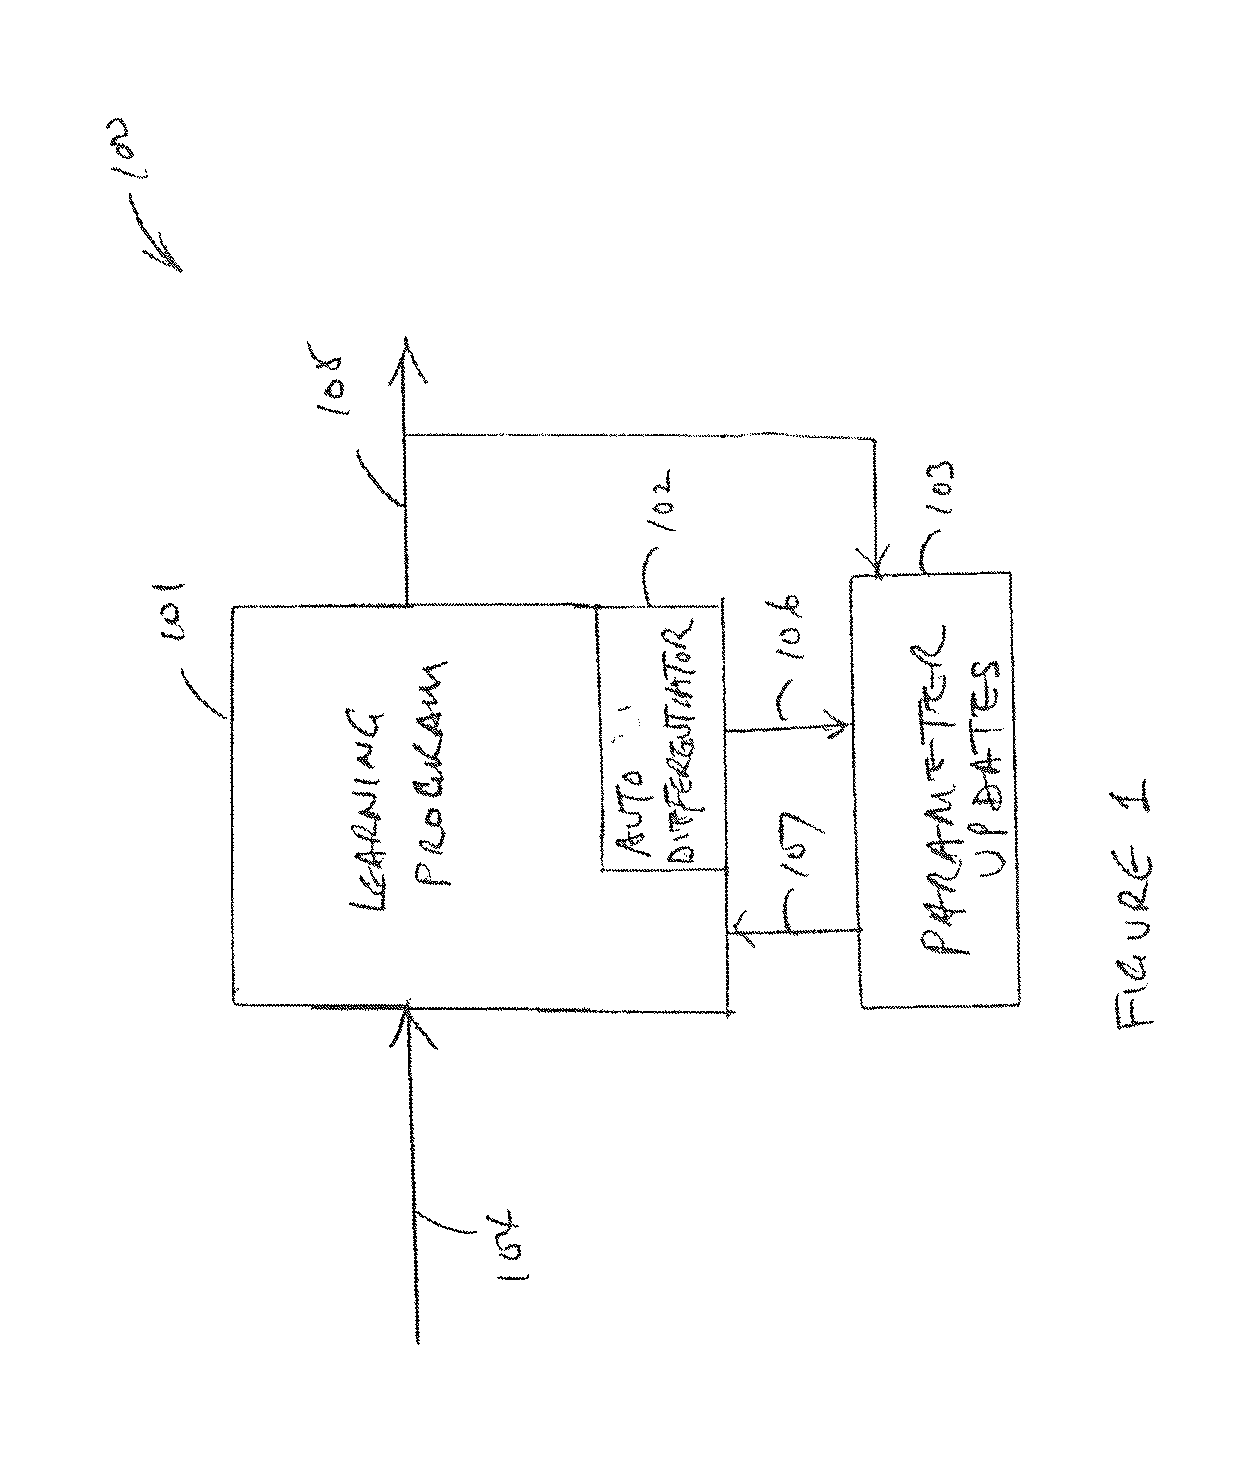 Method for improving an autocorrector using auto-differentiation